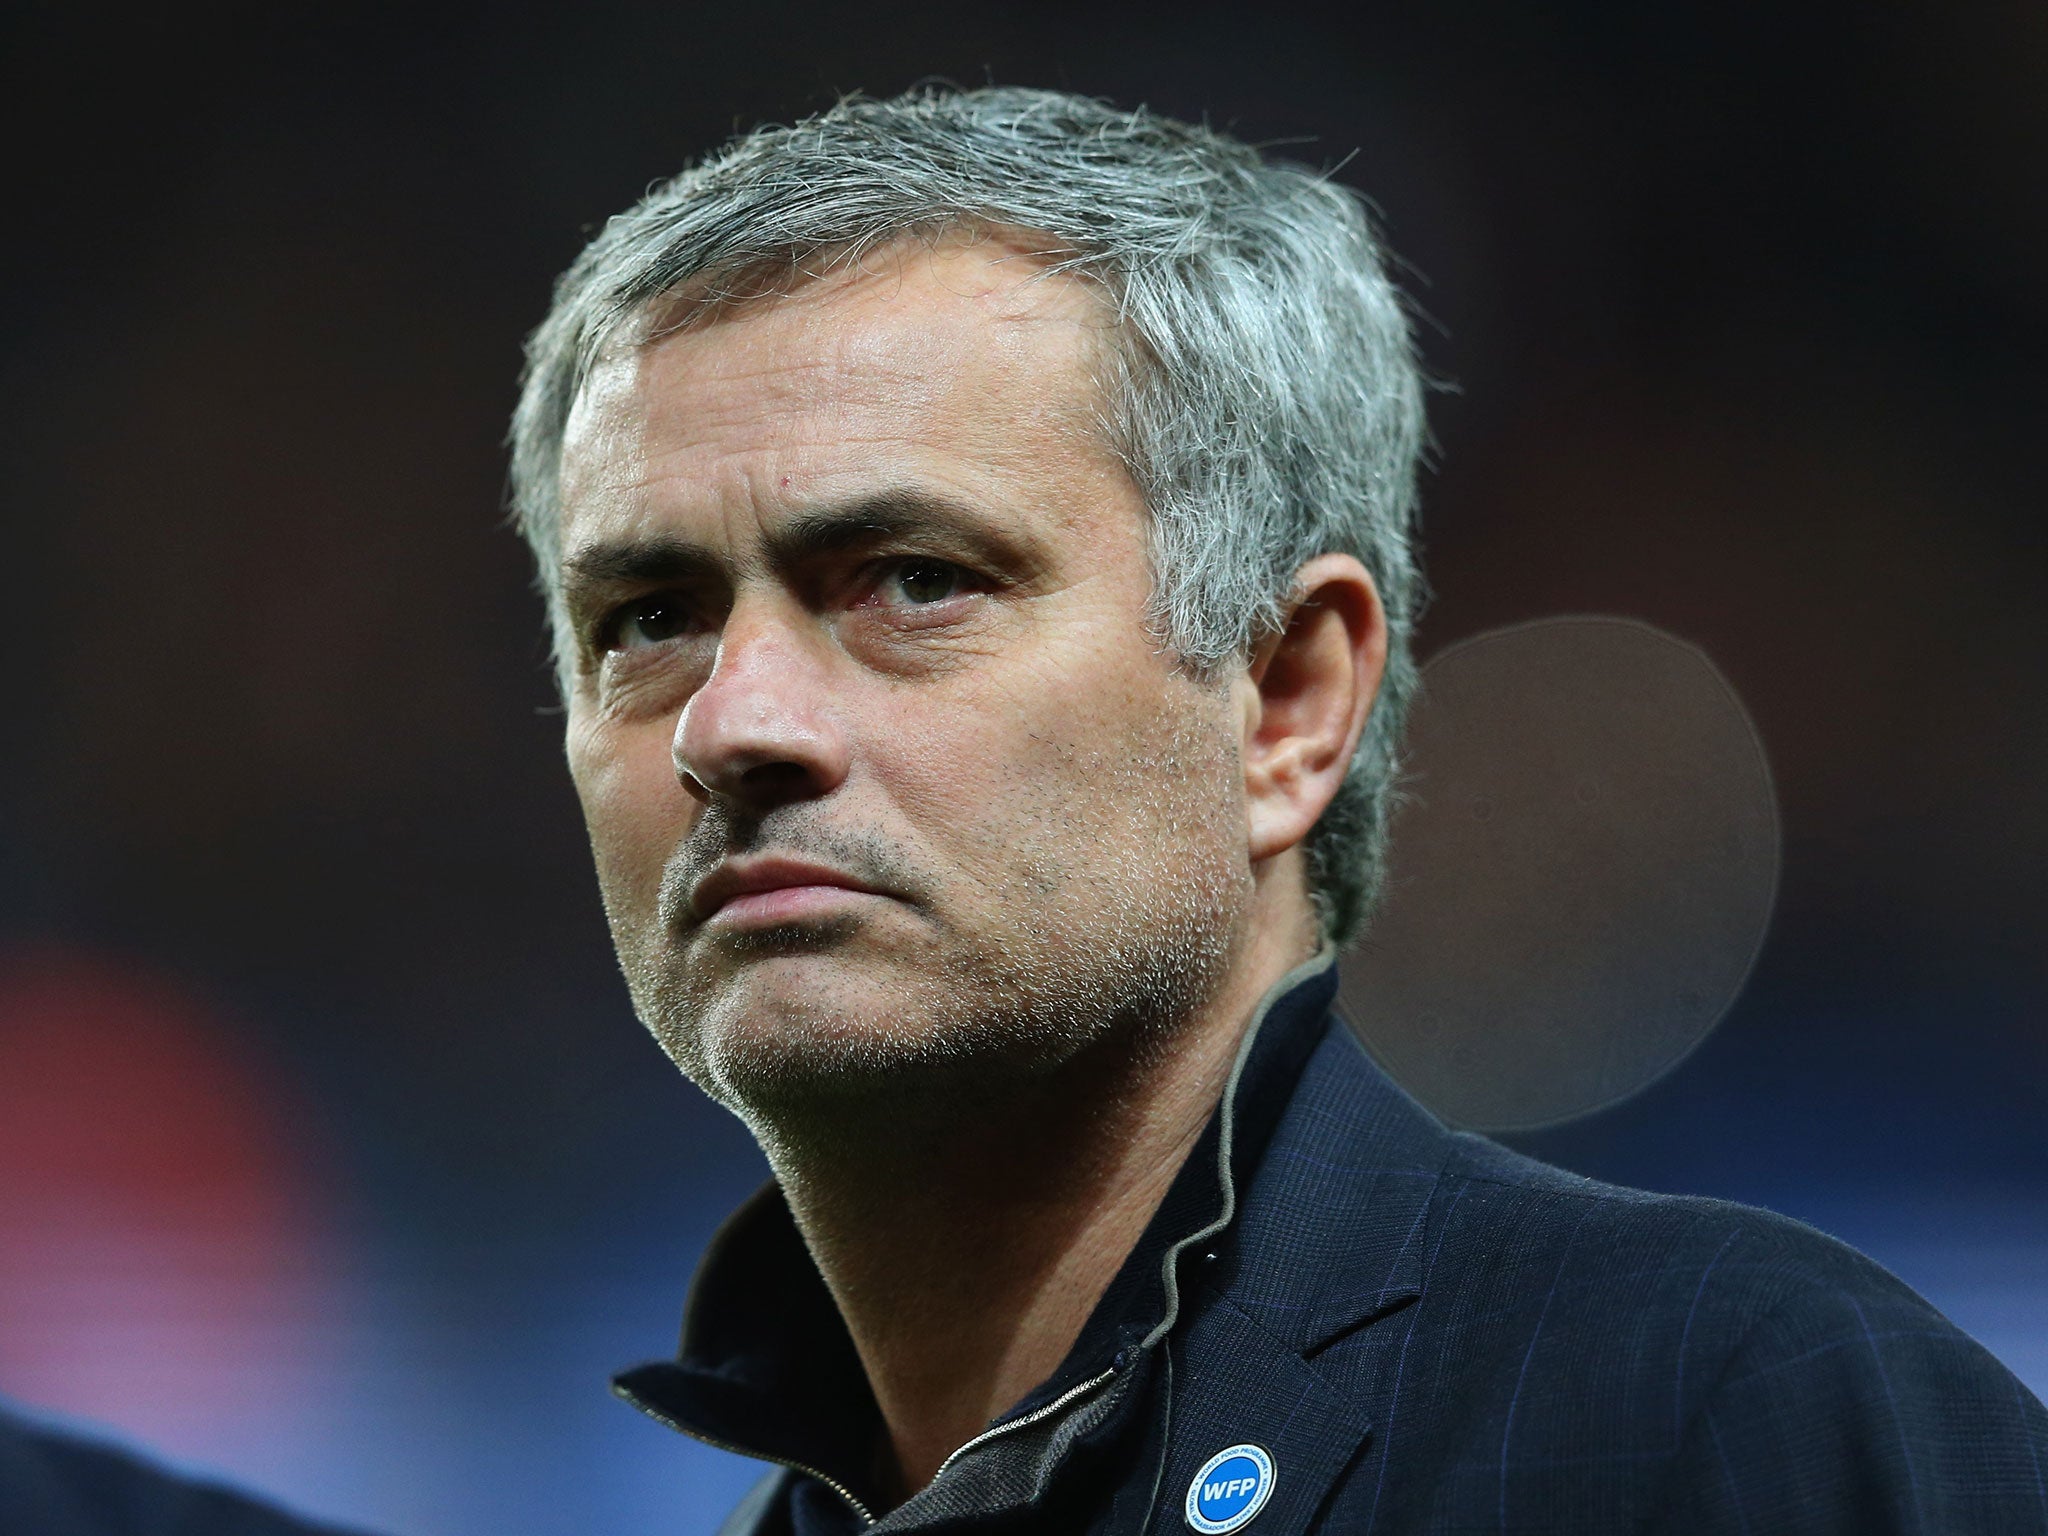 Chelsea manager Jose Mourinho admitted he was "ashamed" by the racial abuse in Paris